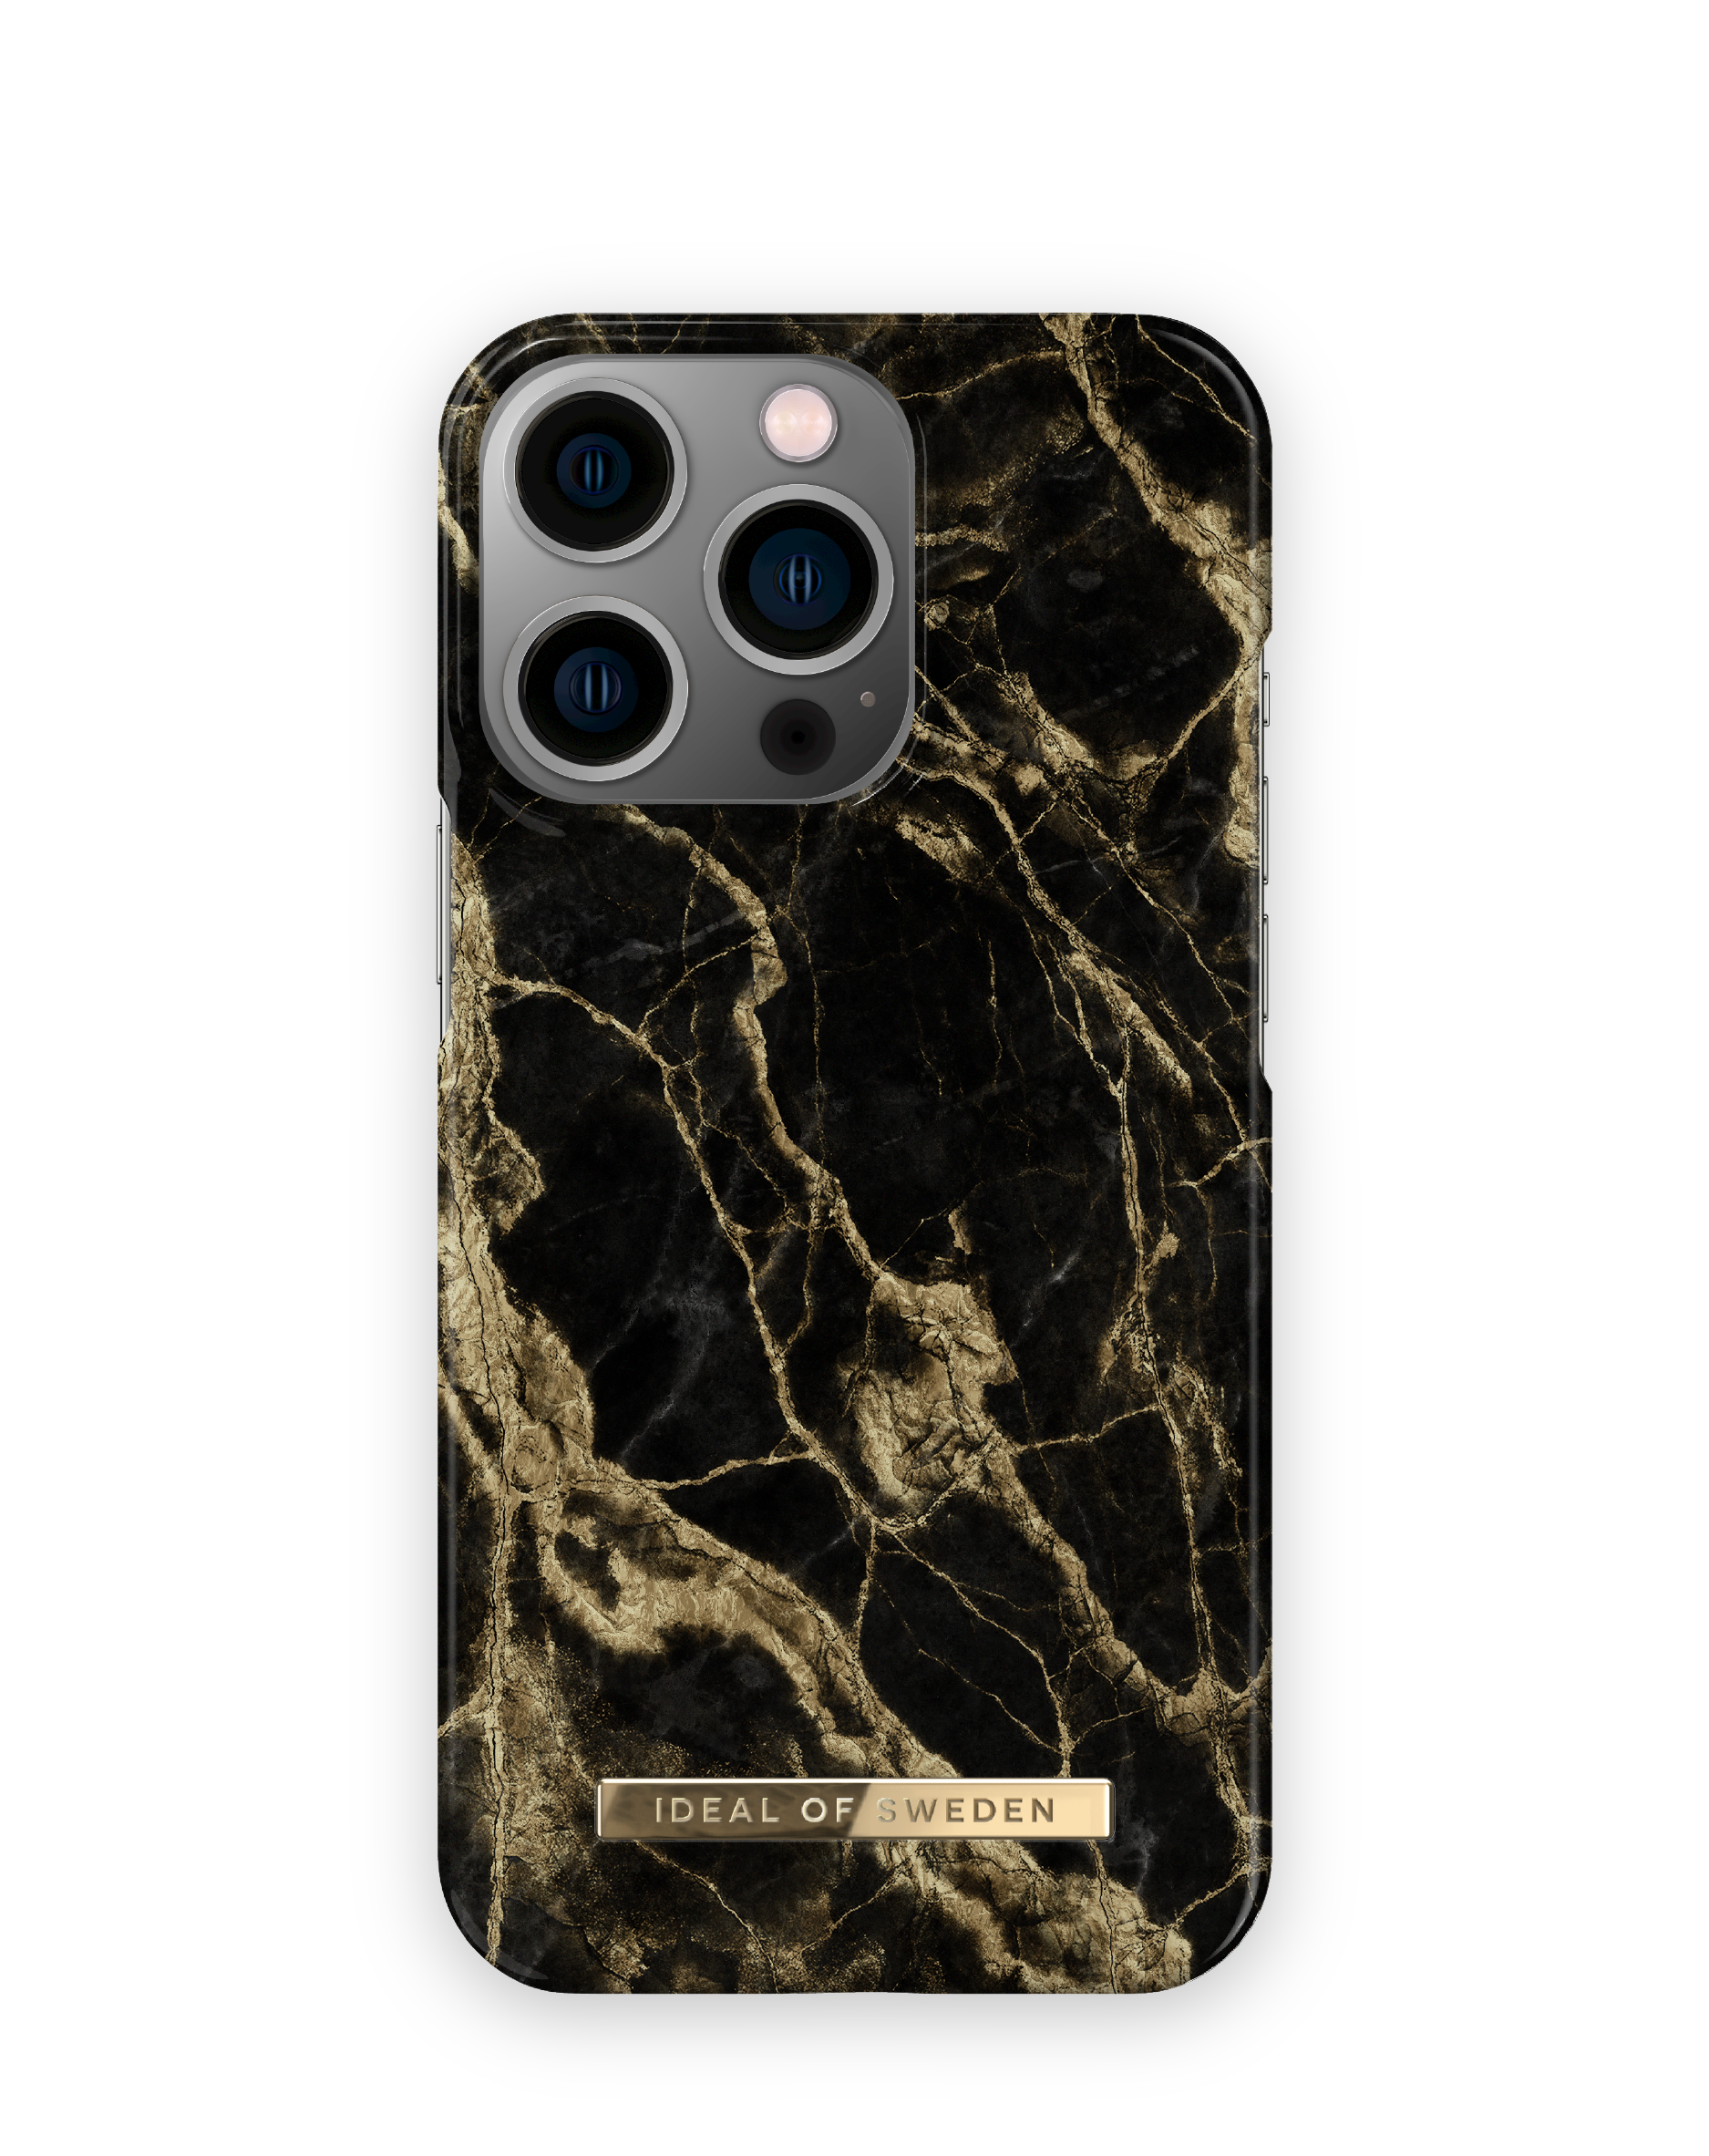 Backcover, SWEDEN Pro, OF Marble iPhone Golden 13 Apple, Smoke IDEAL IDFCSS20-I2161P-191,